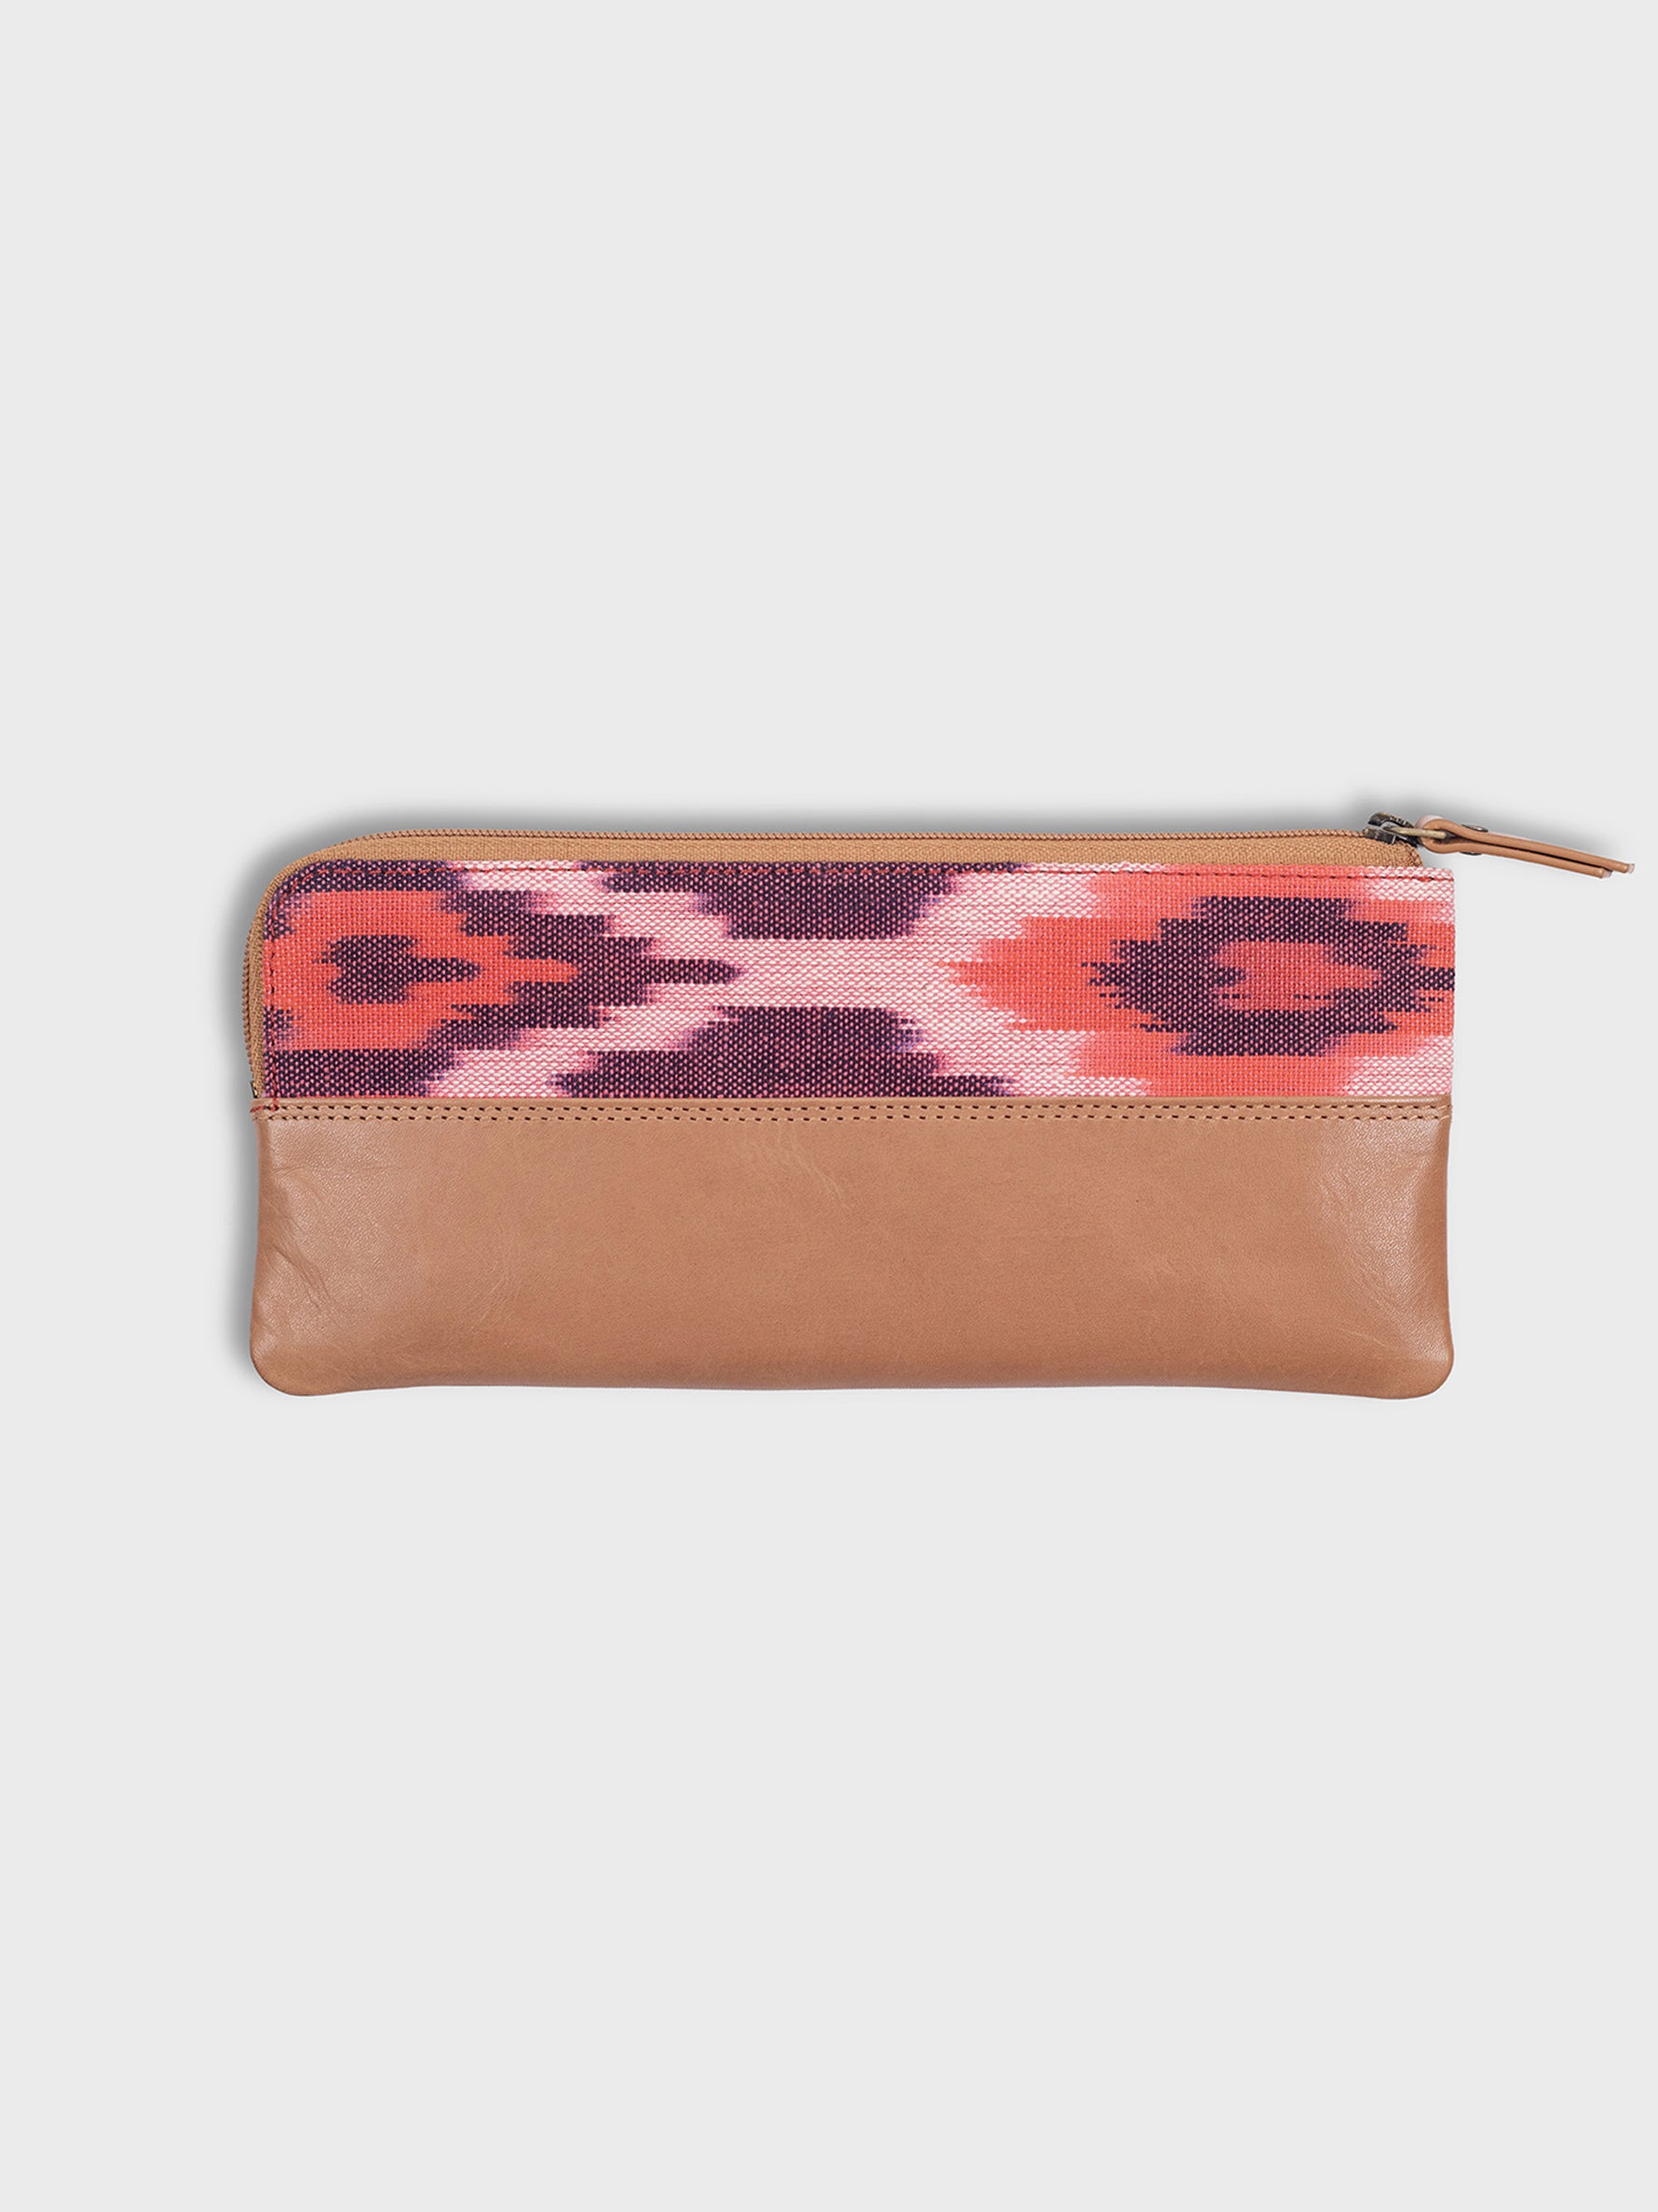 Handcrafted Premium Genuine Vegetable Tanned Leather & Pink Ikat Pencil Pouch for Women Tan & Loom